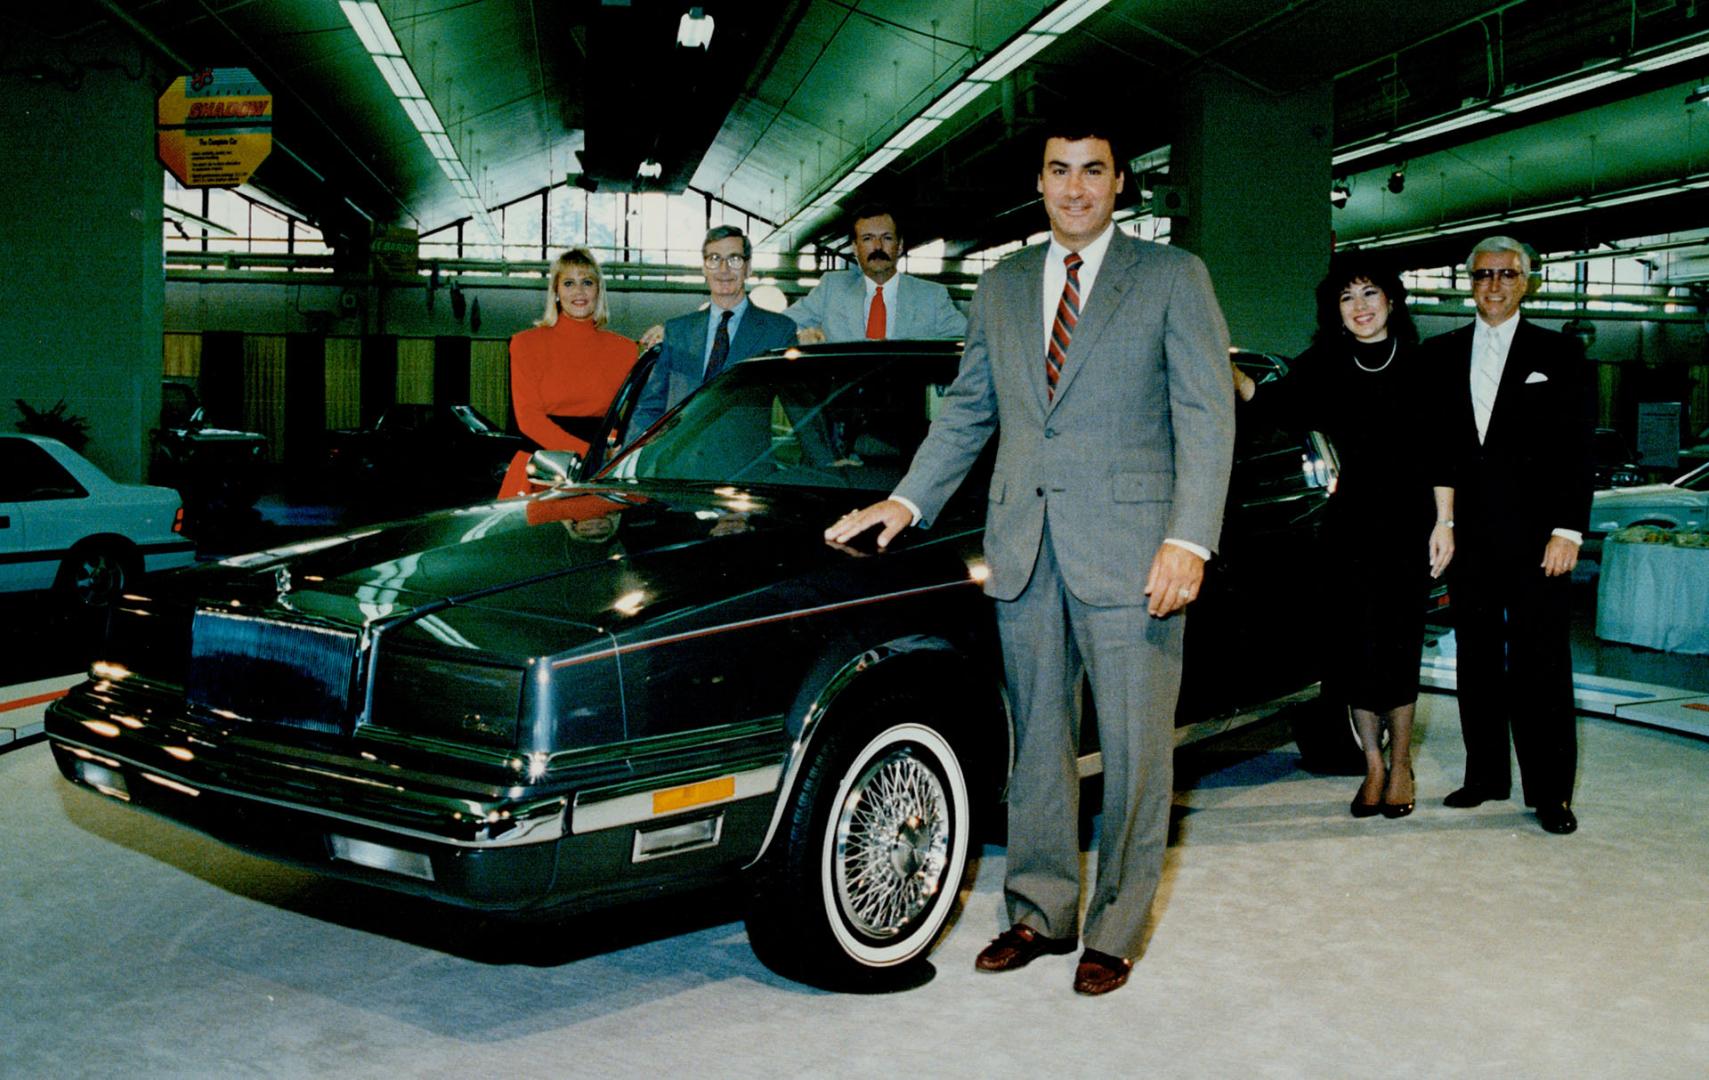 Roomiest Chrysler: John Damoose, Vice-president of sales for Chrysler Canada, can take five friends along in the new six-cylinder Chrysler New Yorker Landau.